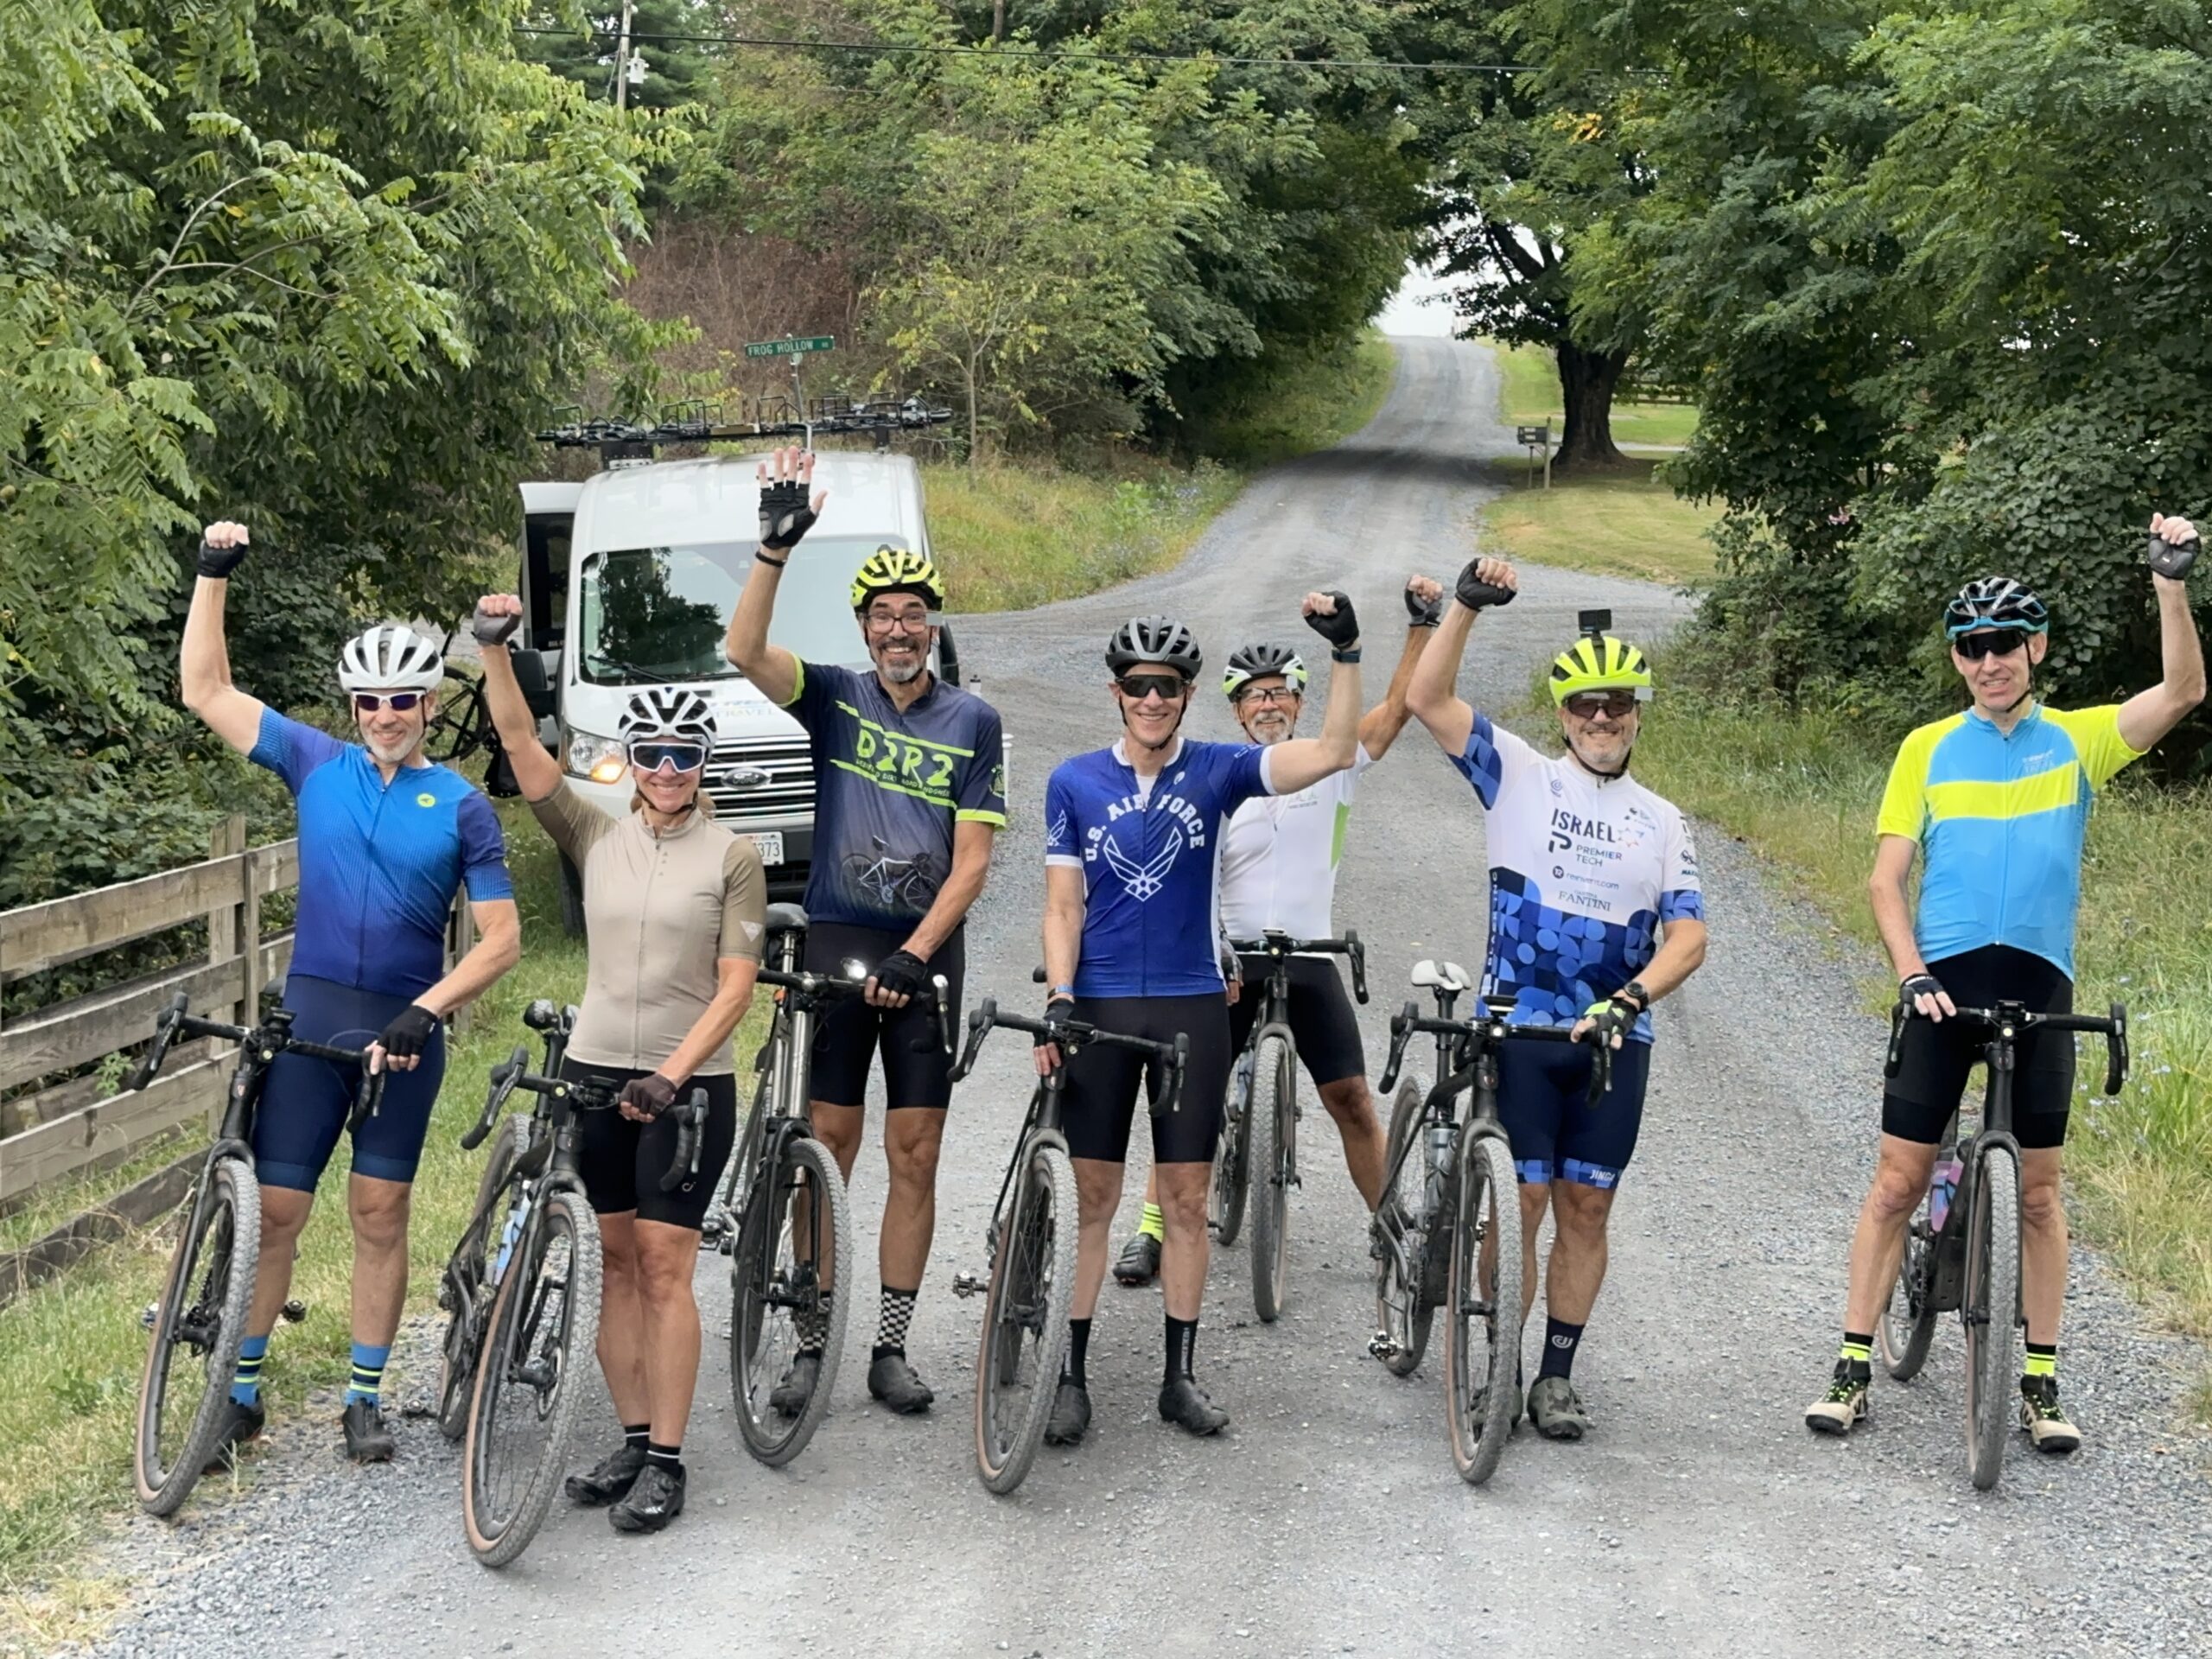 Group of cyclists on dirt road with hands in the air triumphantly